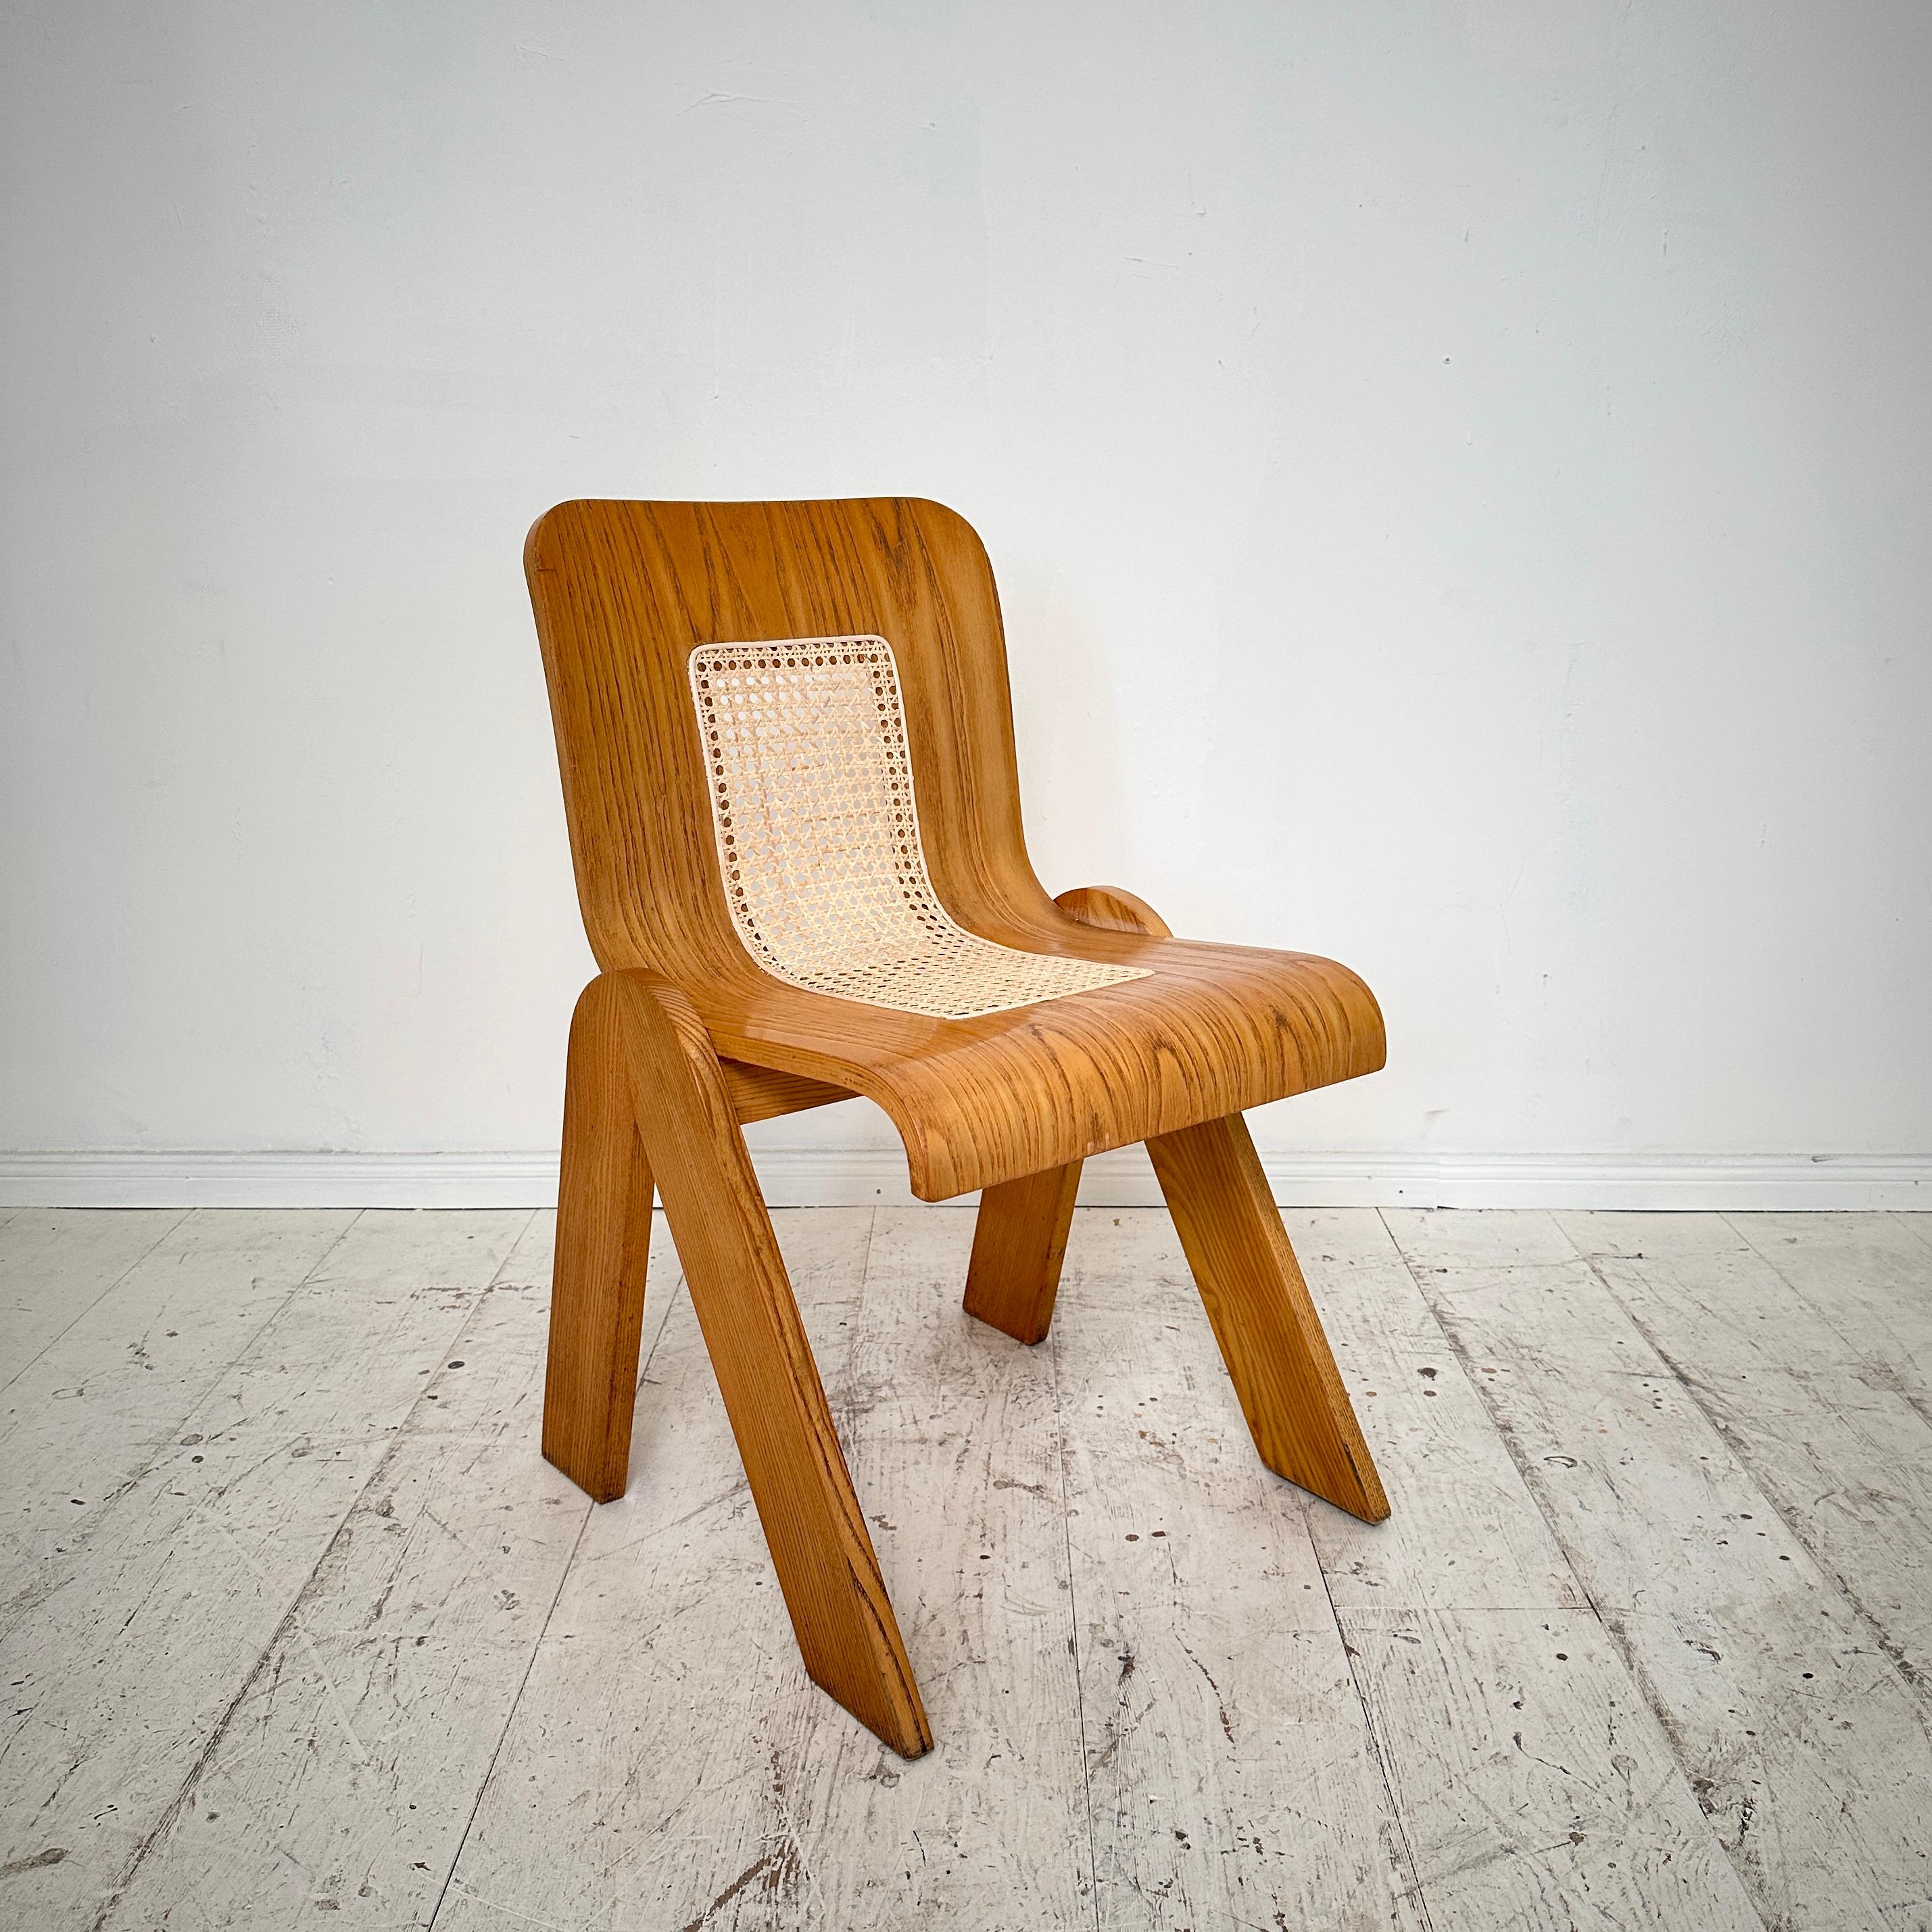 1 of 3 Mid Century Italian Ash Dining Chairs by Gigi Sabadin for Stilwood, 1970s For Sale 3